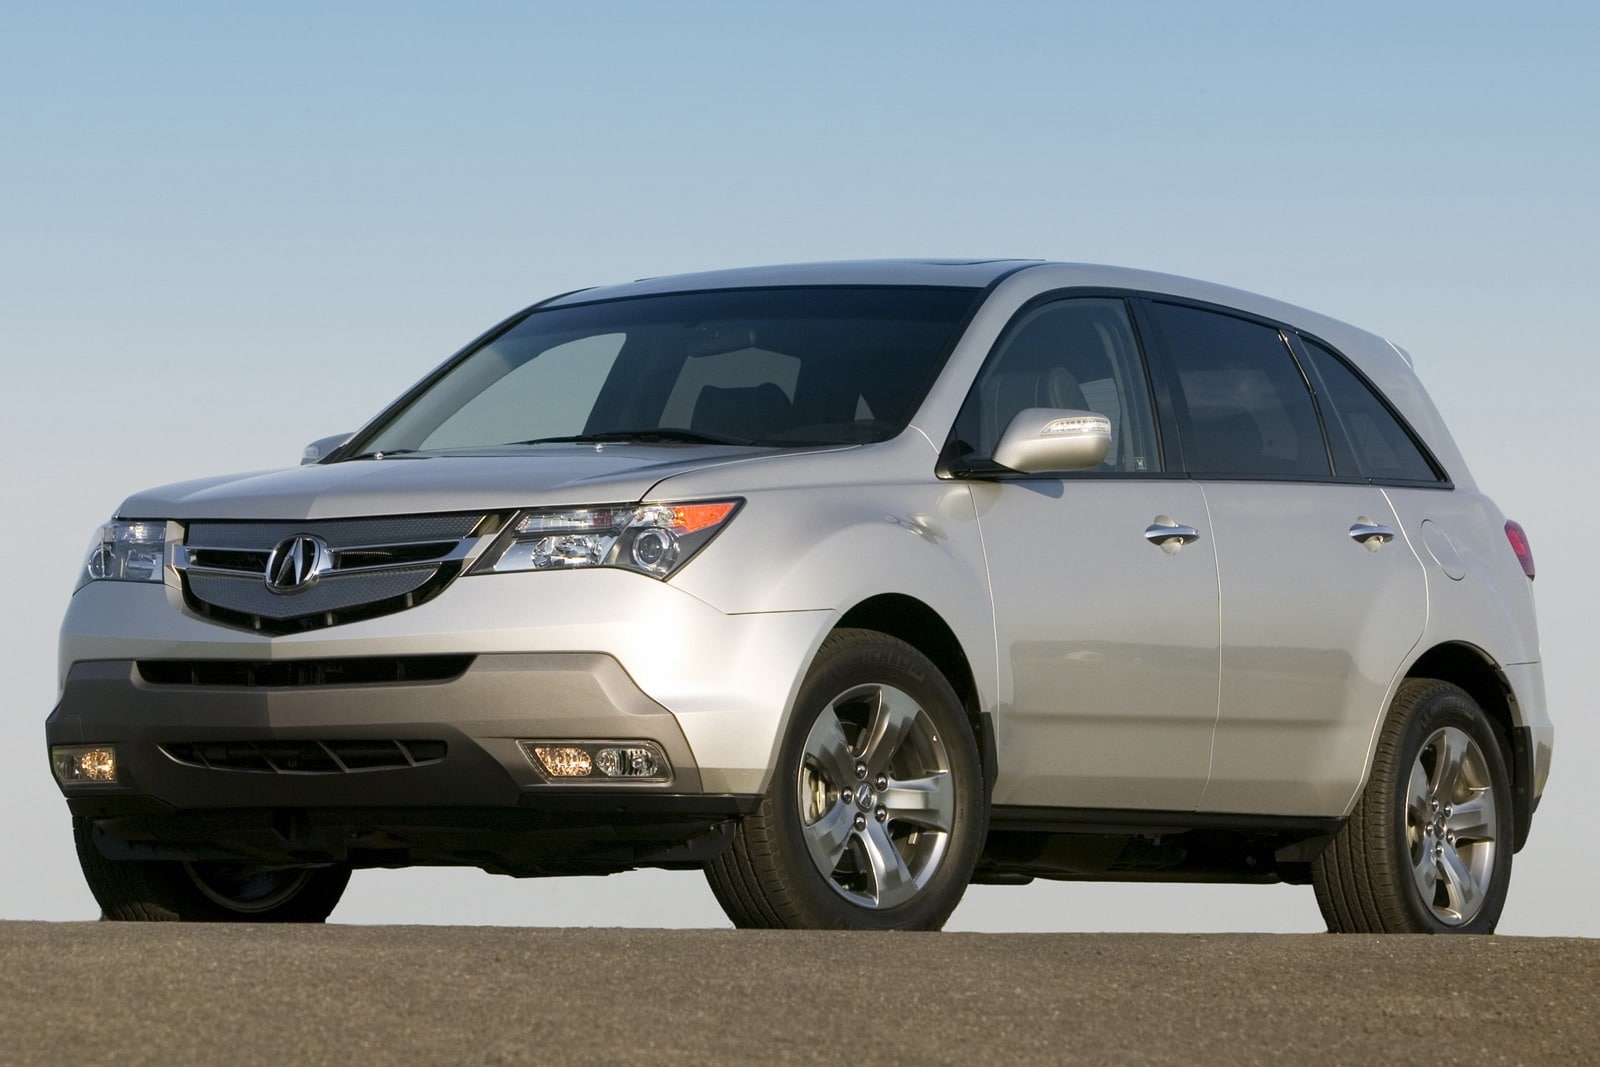 2008 Acura MDX Review & Ratings | Edmunds